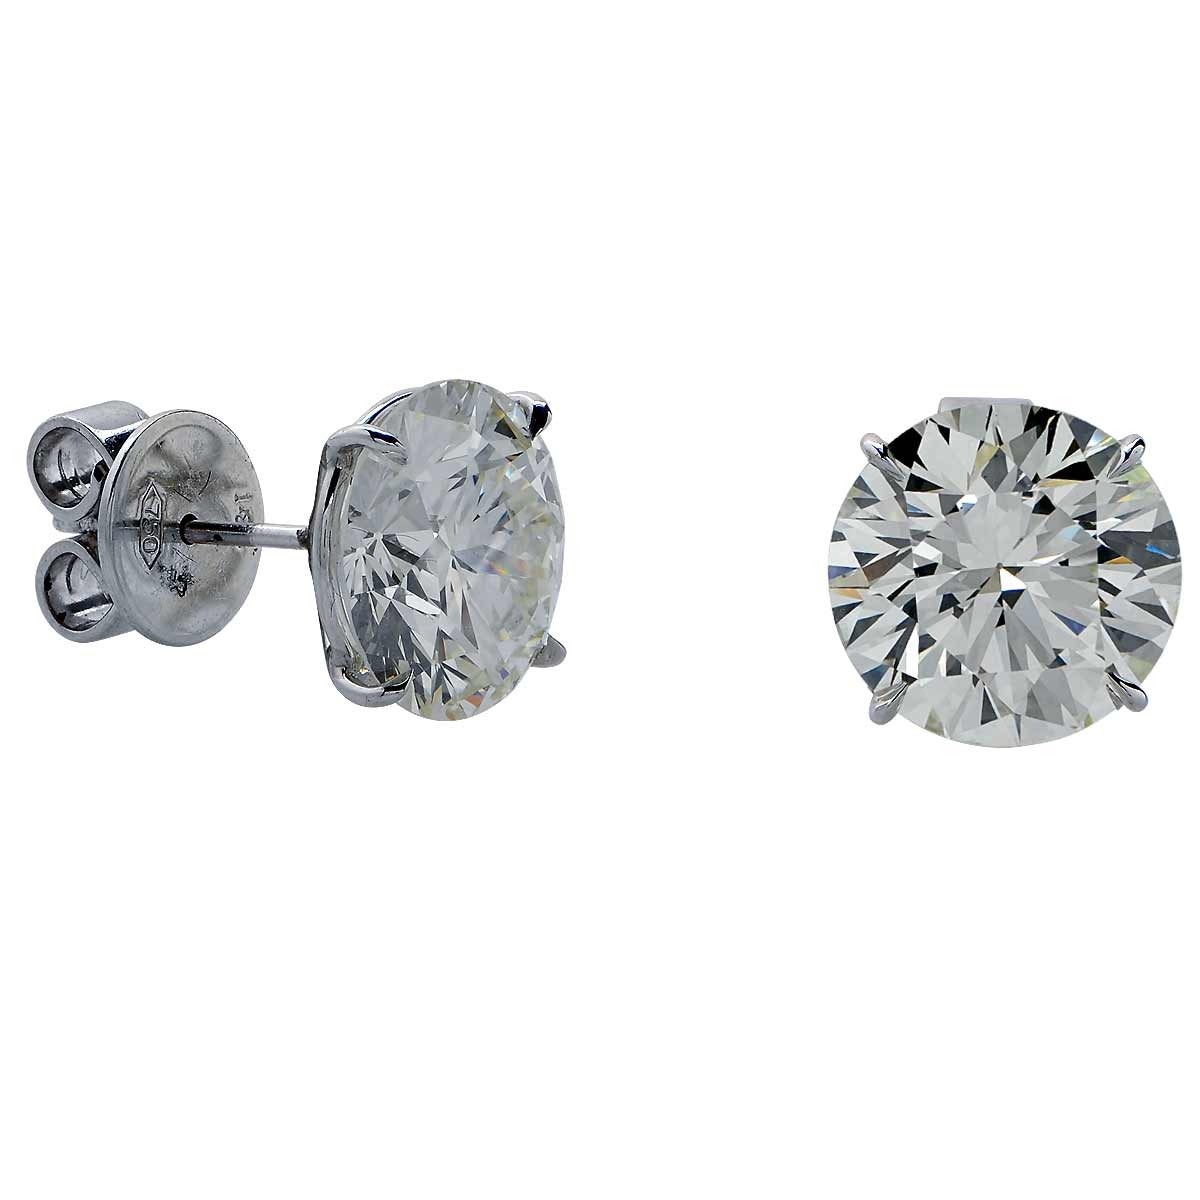 Platinum Stud Earrings Featuring 2 GIA Round Brilliant Cut Diamonds Weight 10.34cts Total Weight, K-L Color, VS1 Clarity.